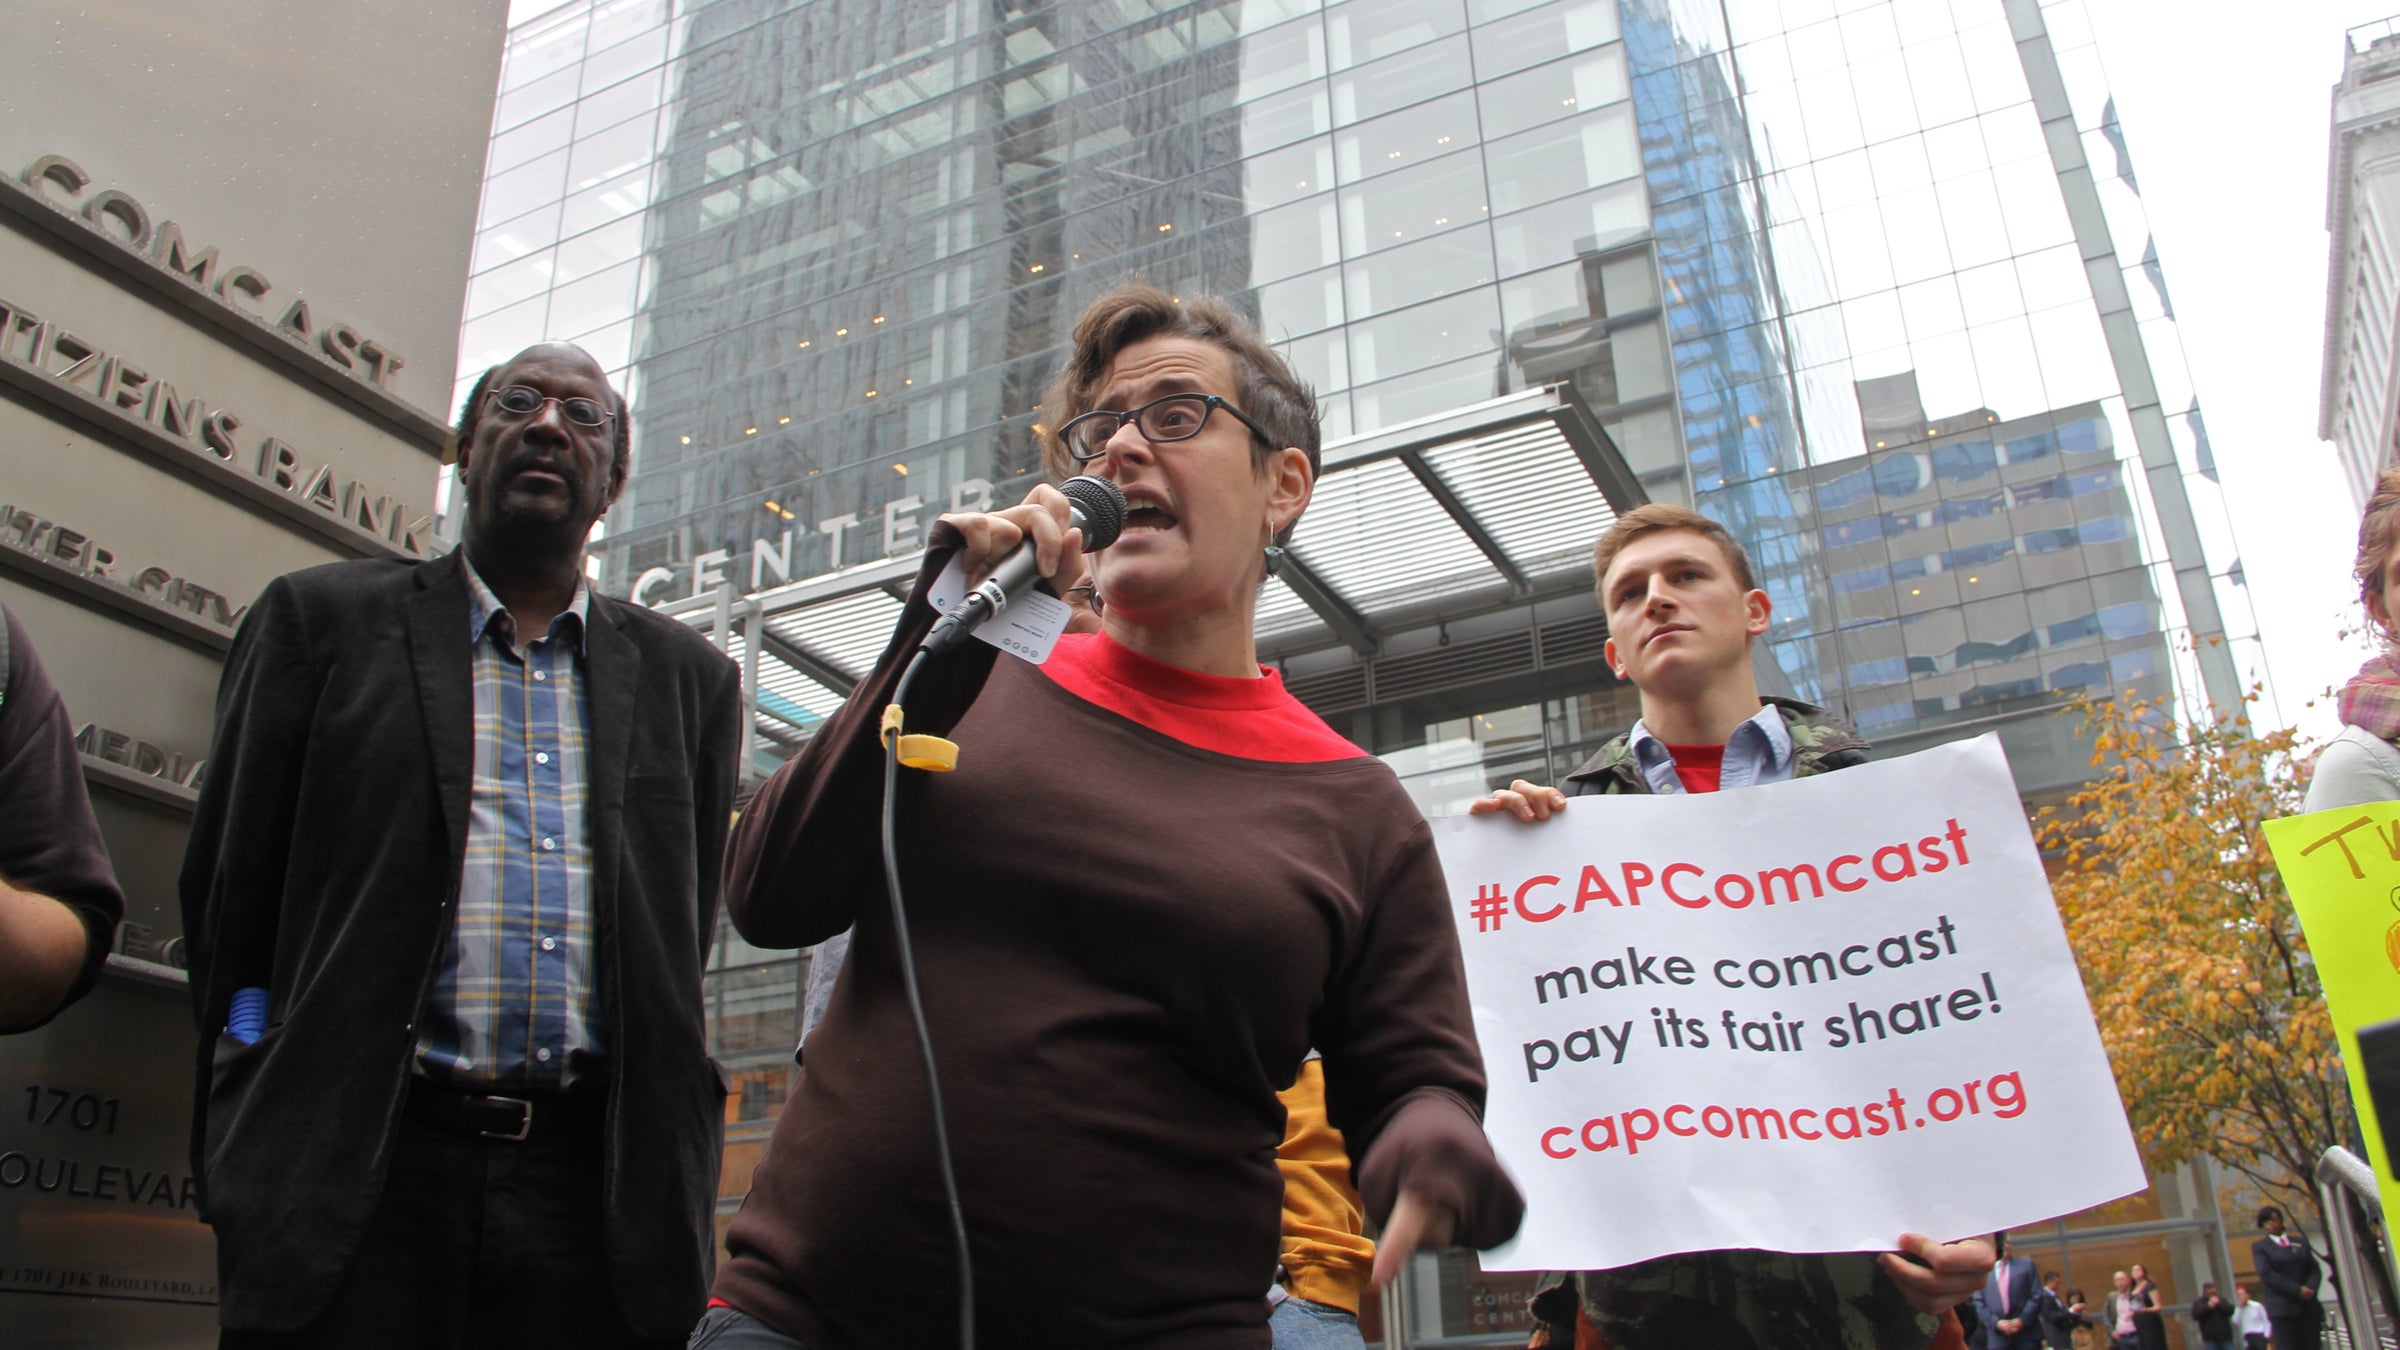  Hannah Sassaman of CAP Comcast leads a rally outside Comcast's Center City headquarters. (Emma Lee/WHYY) 